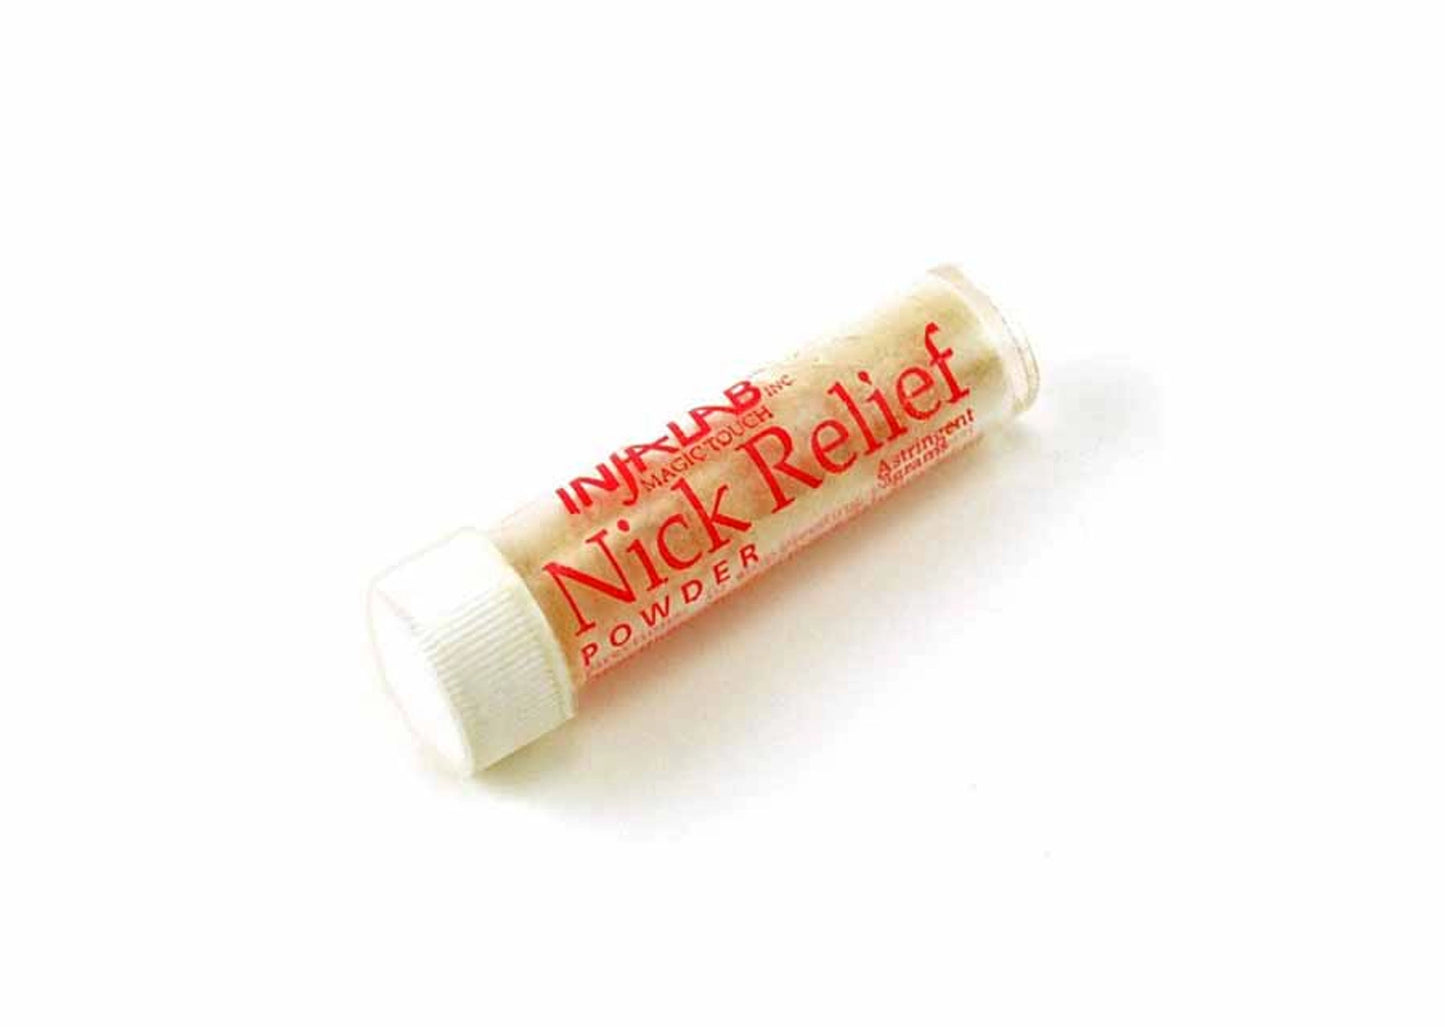 Infa-Lab Magic Touch Nick Relief Powder